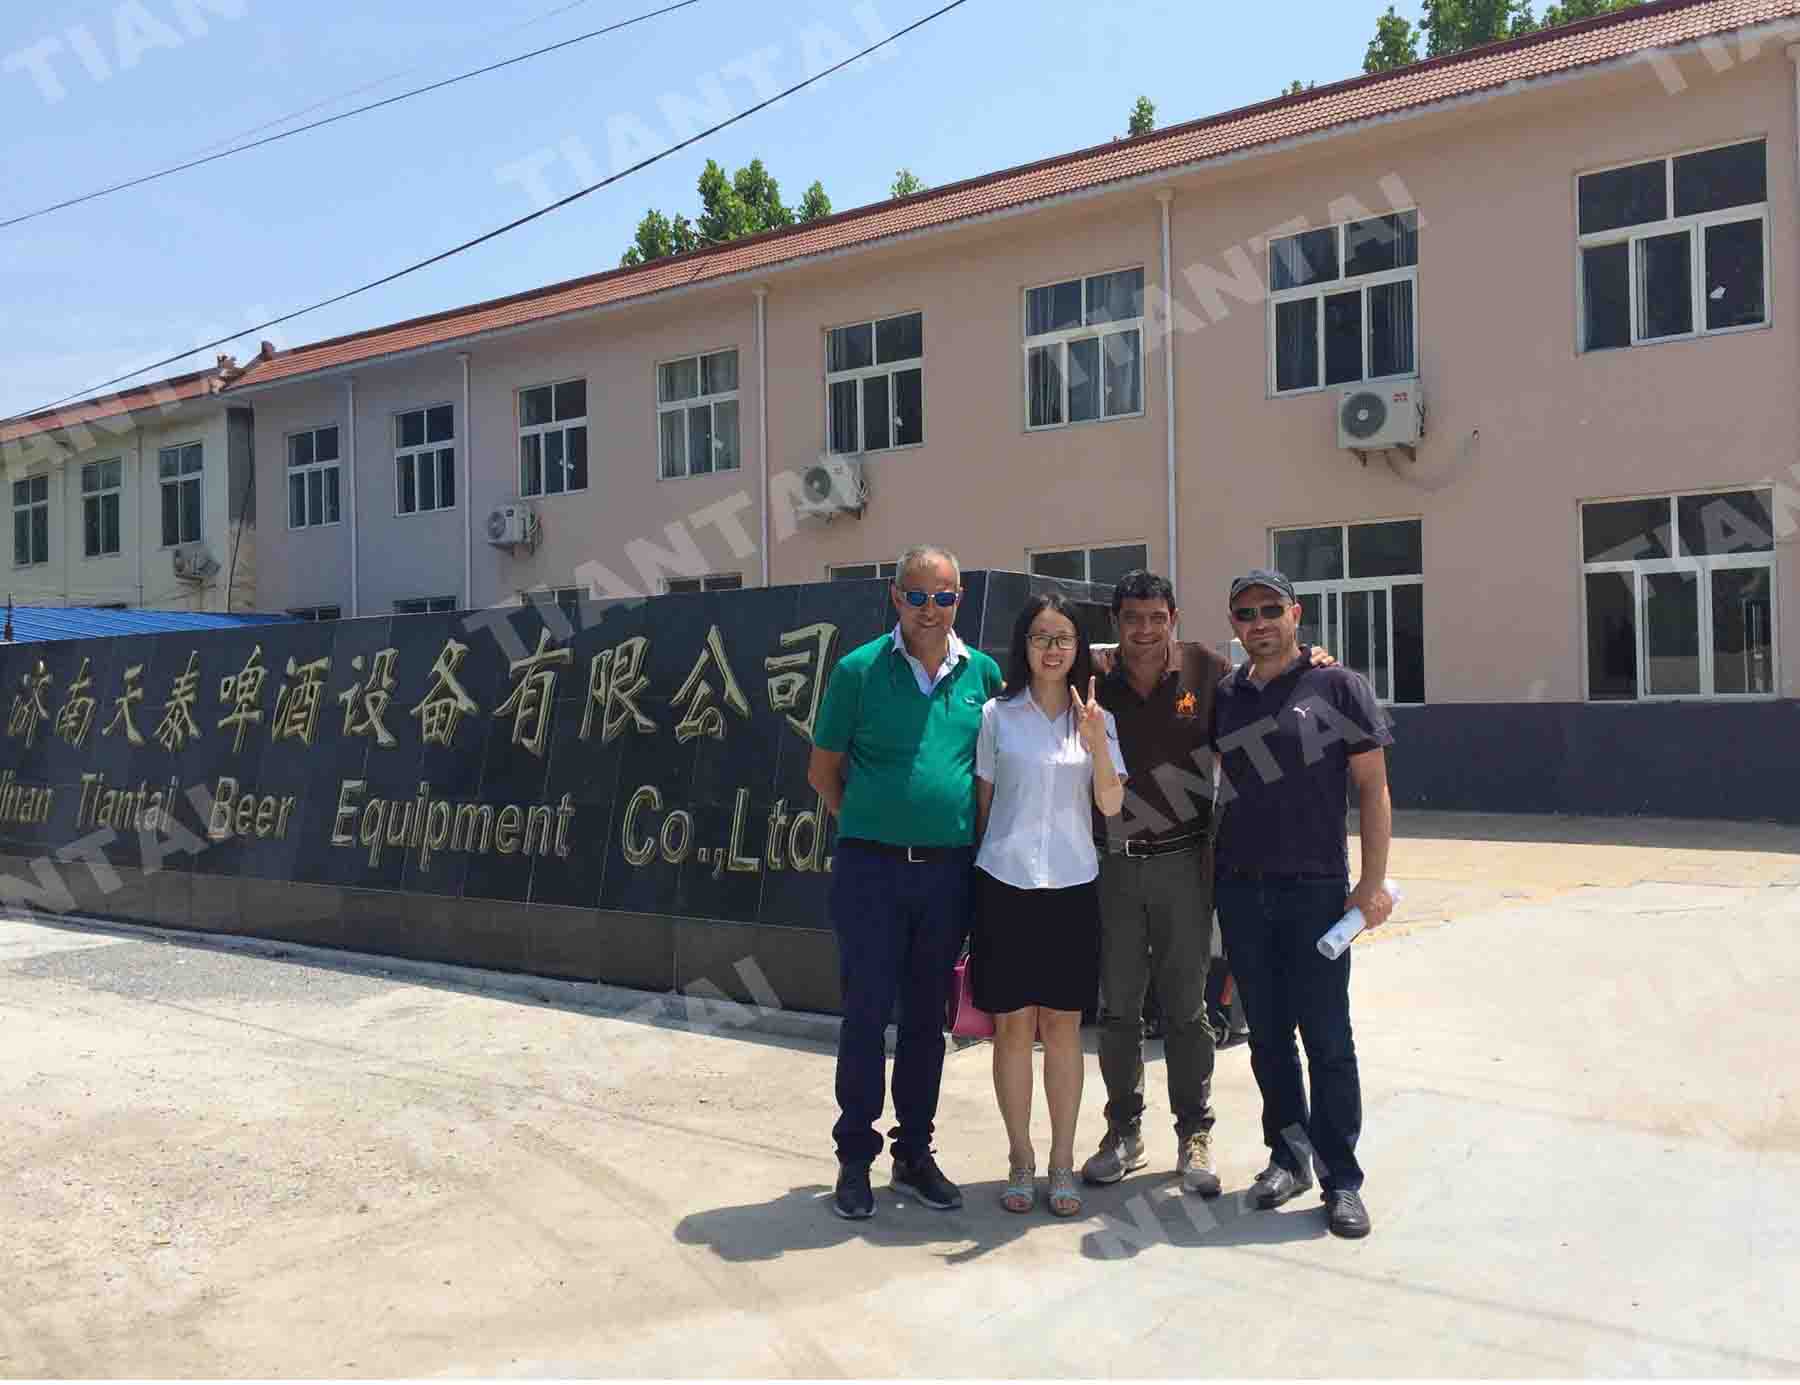 Warmly welcome Italy Customer visited our beer equipmen